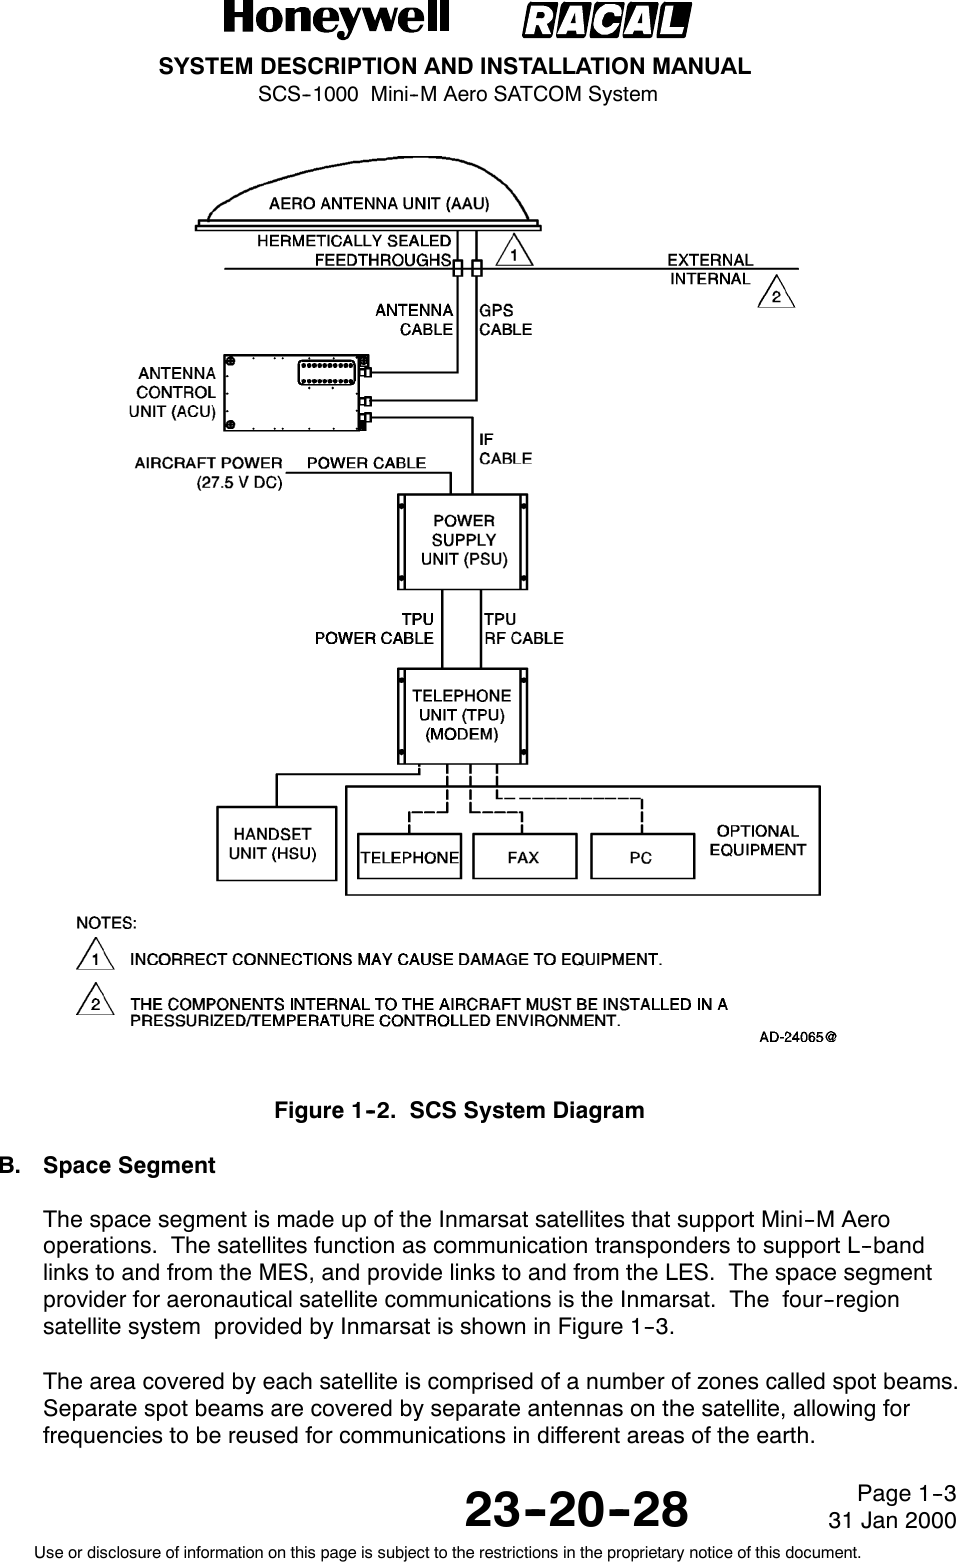 SYSTEM DESCRIPTION AND INSTALLATION MANUALSCS--1000 Mini--M Aero SATCOM System23--20--28Use or disclosure of information on this page is subject to the restrictions in the proprietary notice of this document.Page 1--331 Jan 2000Figure 1--2. SCS System DiagramB. Space SegmentThe space segment is made up of the Inmarsat satellites that support Mini--M Aerooperations. The satellites function as communication transponders to support L--bandlinks to and from the MES, and provide links to and from the LES. The space segmentprovider for aeronautical satellite communications is the Inmarsat. The four--regionsatellite system provided by Inmarsat is shown in Figure 1--3.The area covered by each satellite is comprised of a number of zones called spot beams.Separate spot beams are covered by separate antennas on the satellite, allowing forfrequencies to be reused for communications in different areas of the earth.